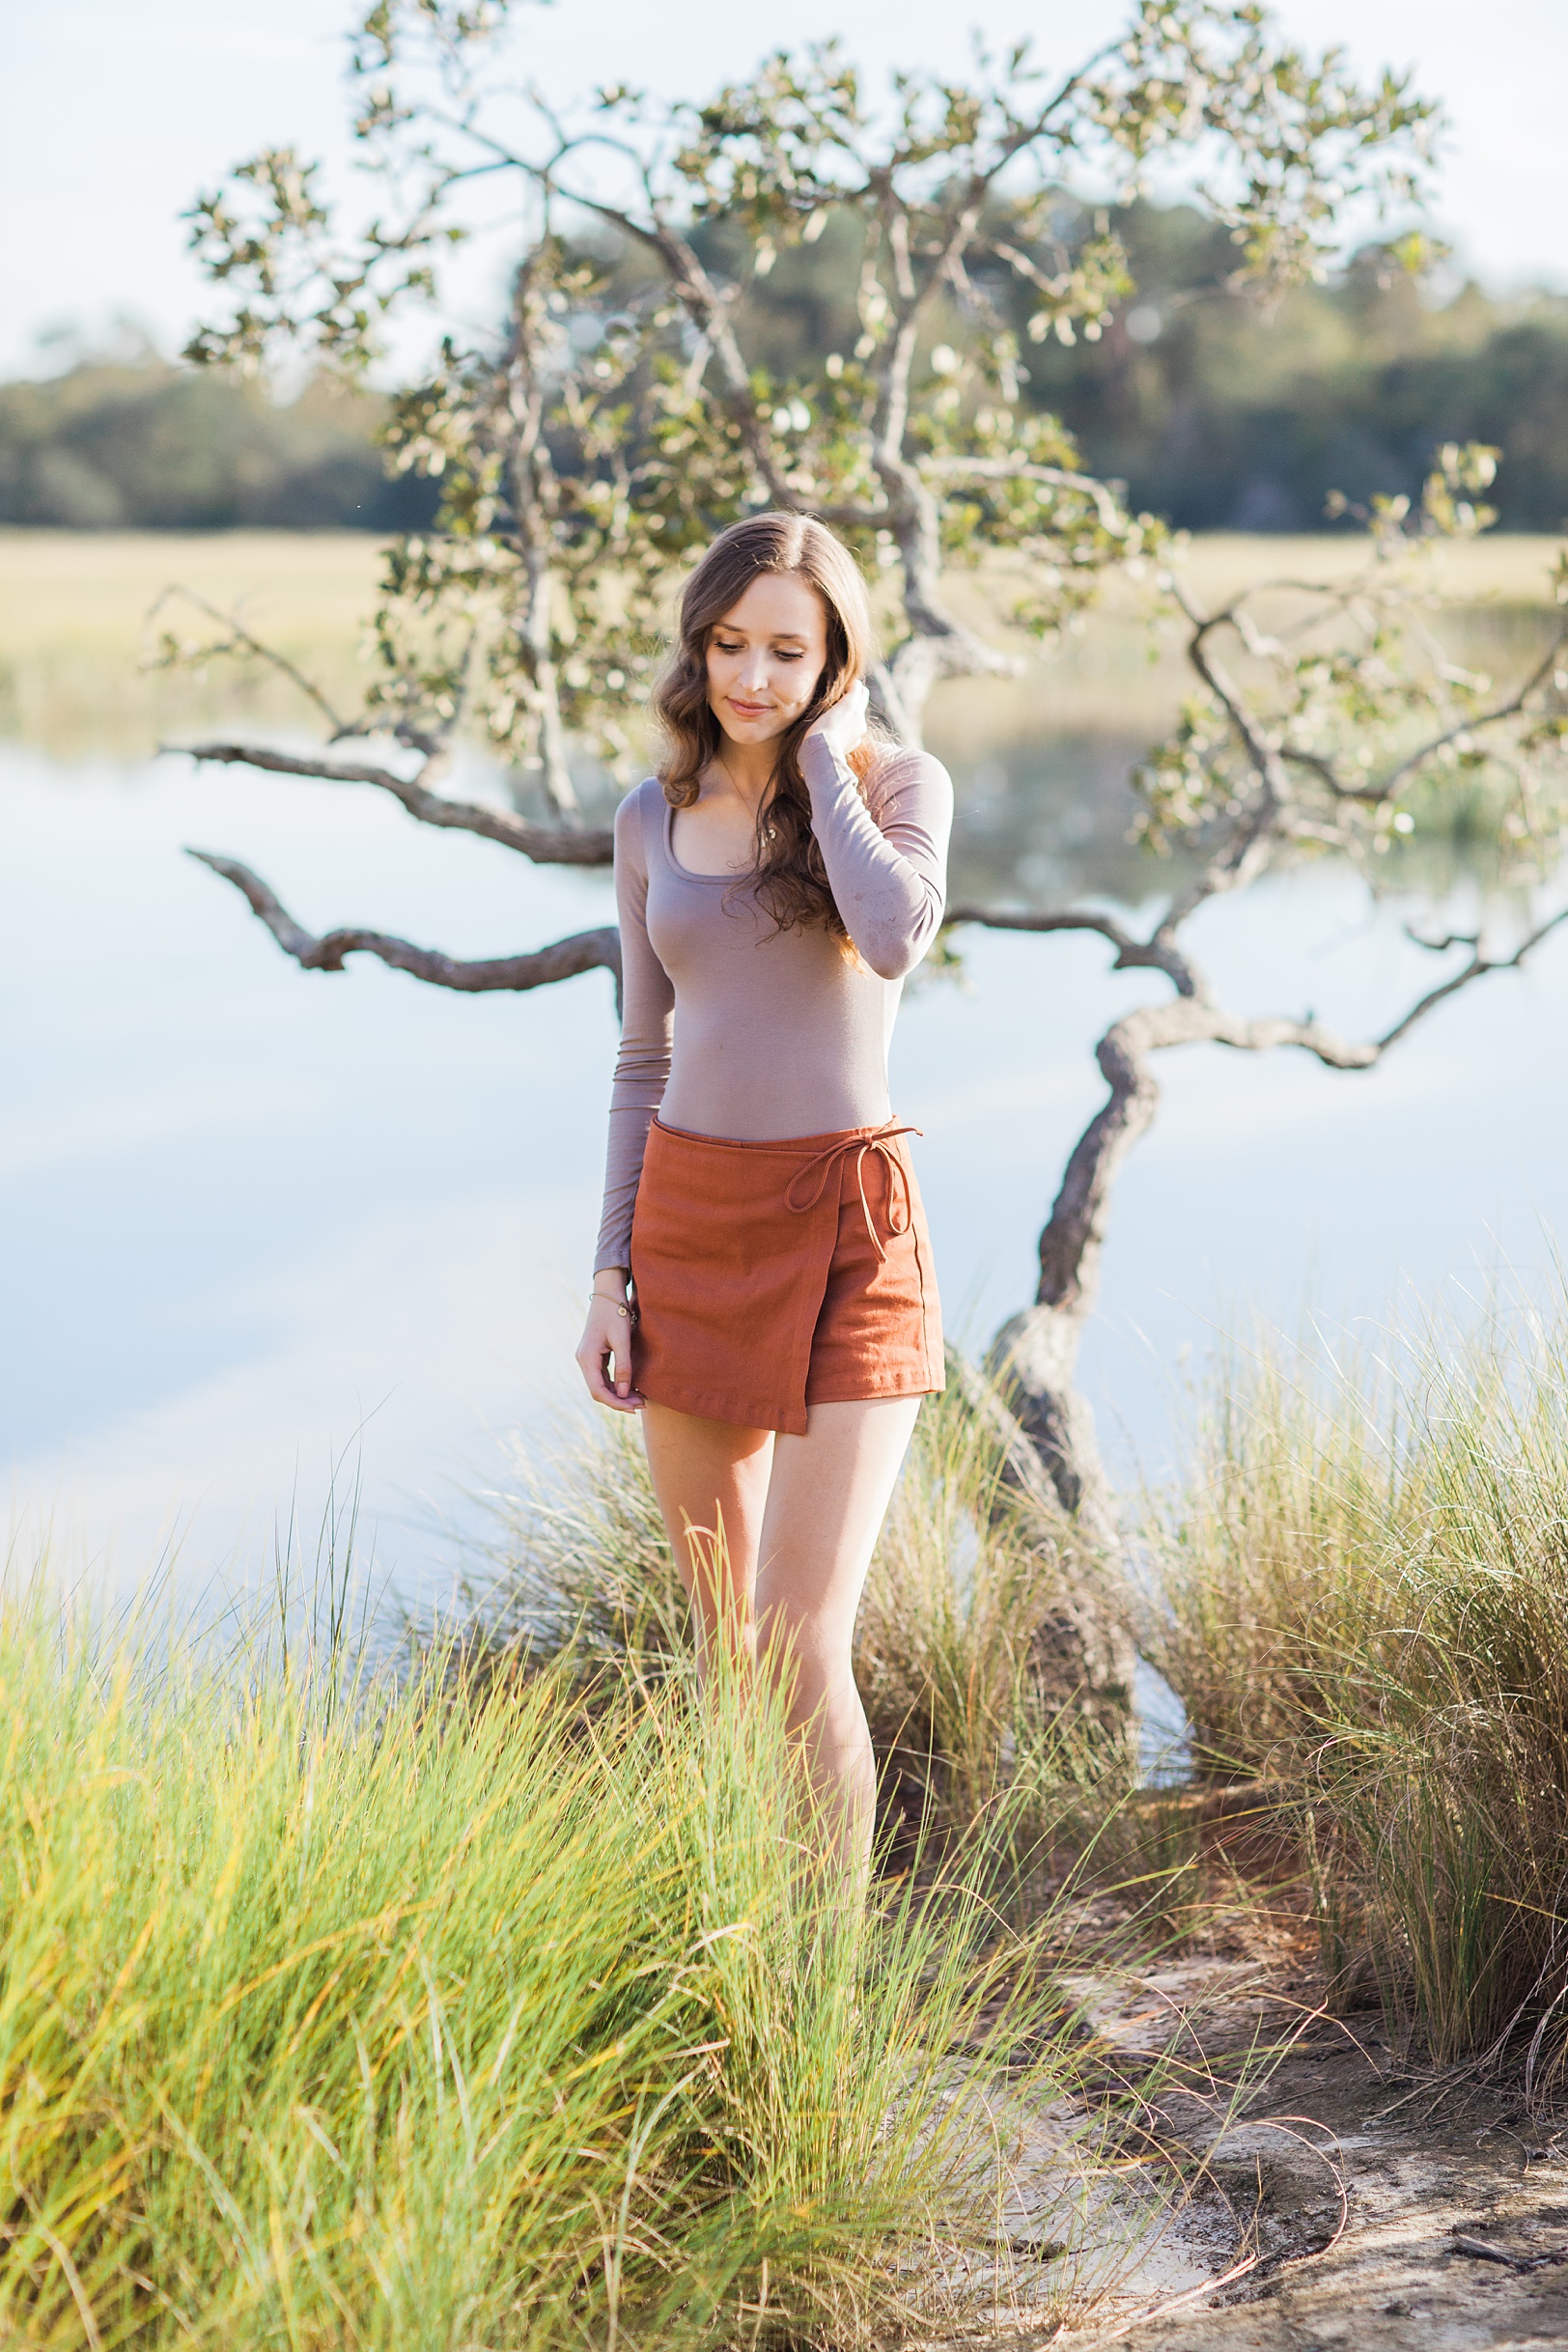 Charles Towne Landing Dreamy Senior Pictures | Kaitlin Scott Photography